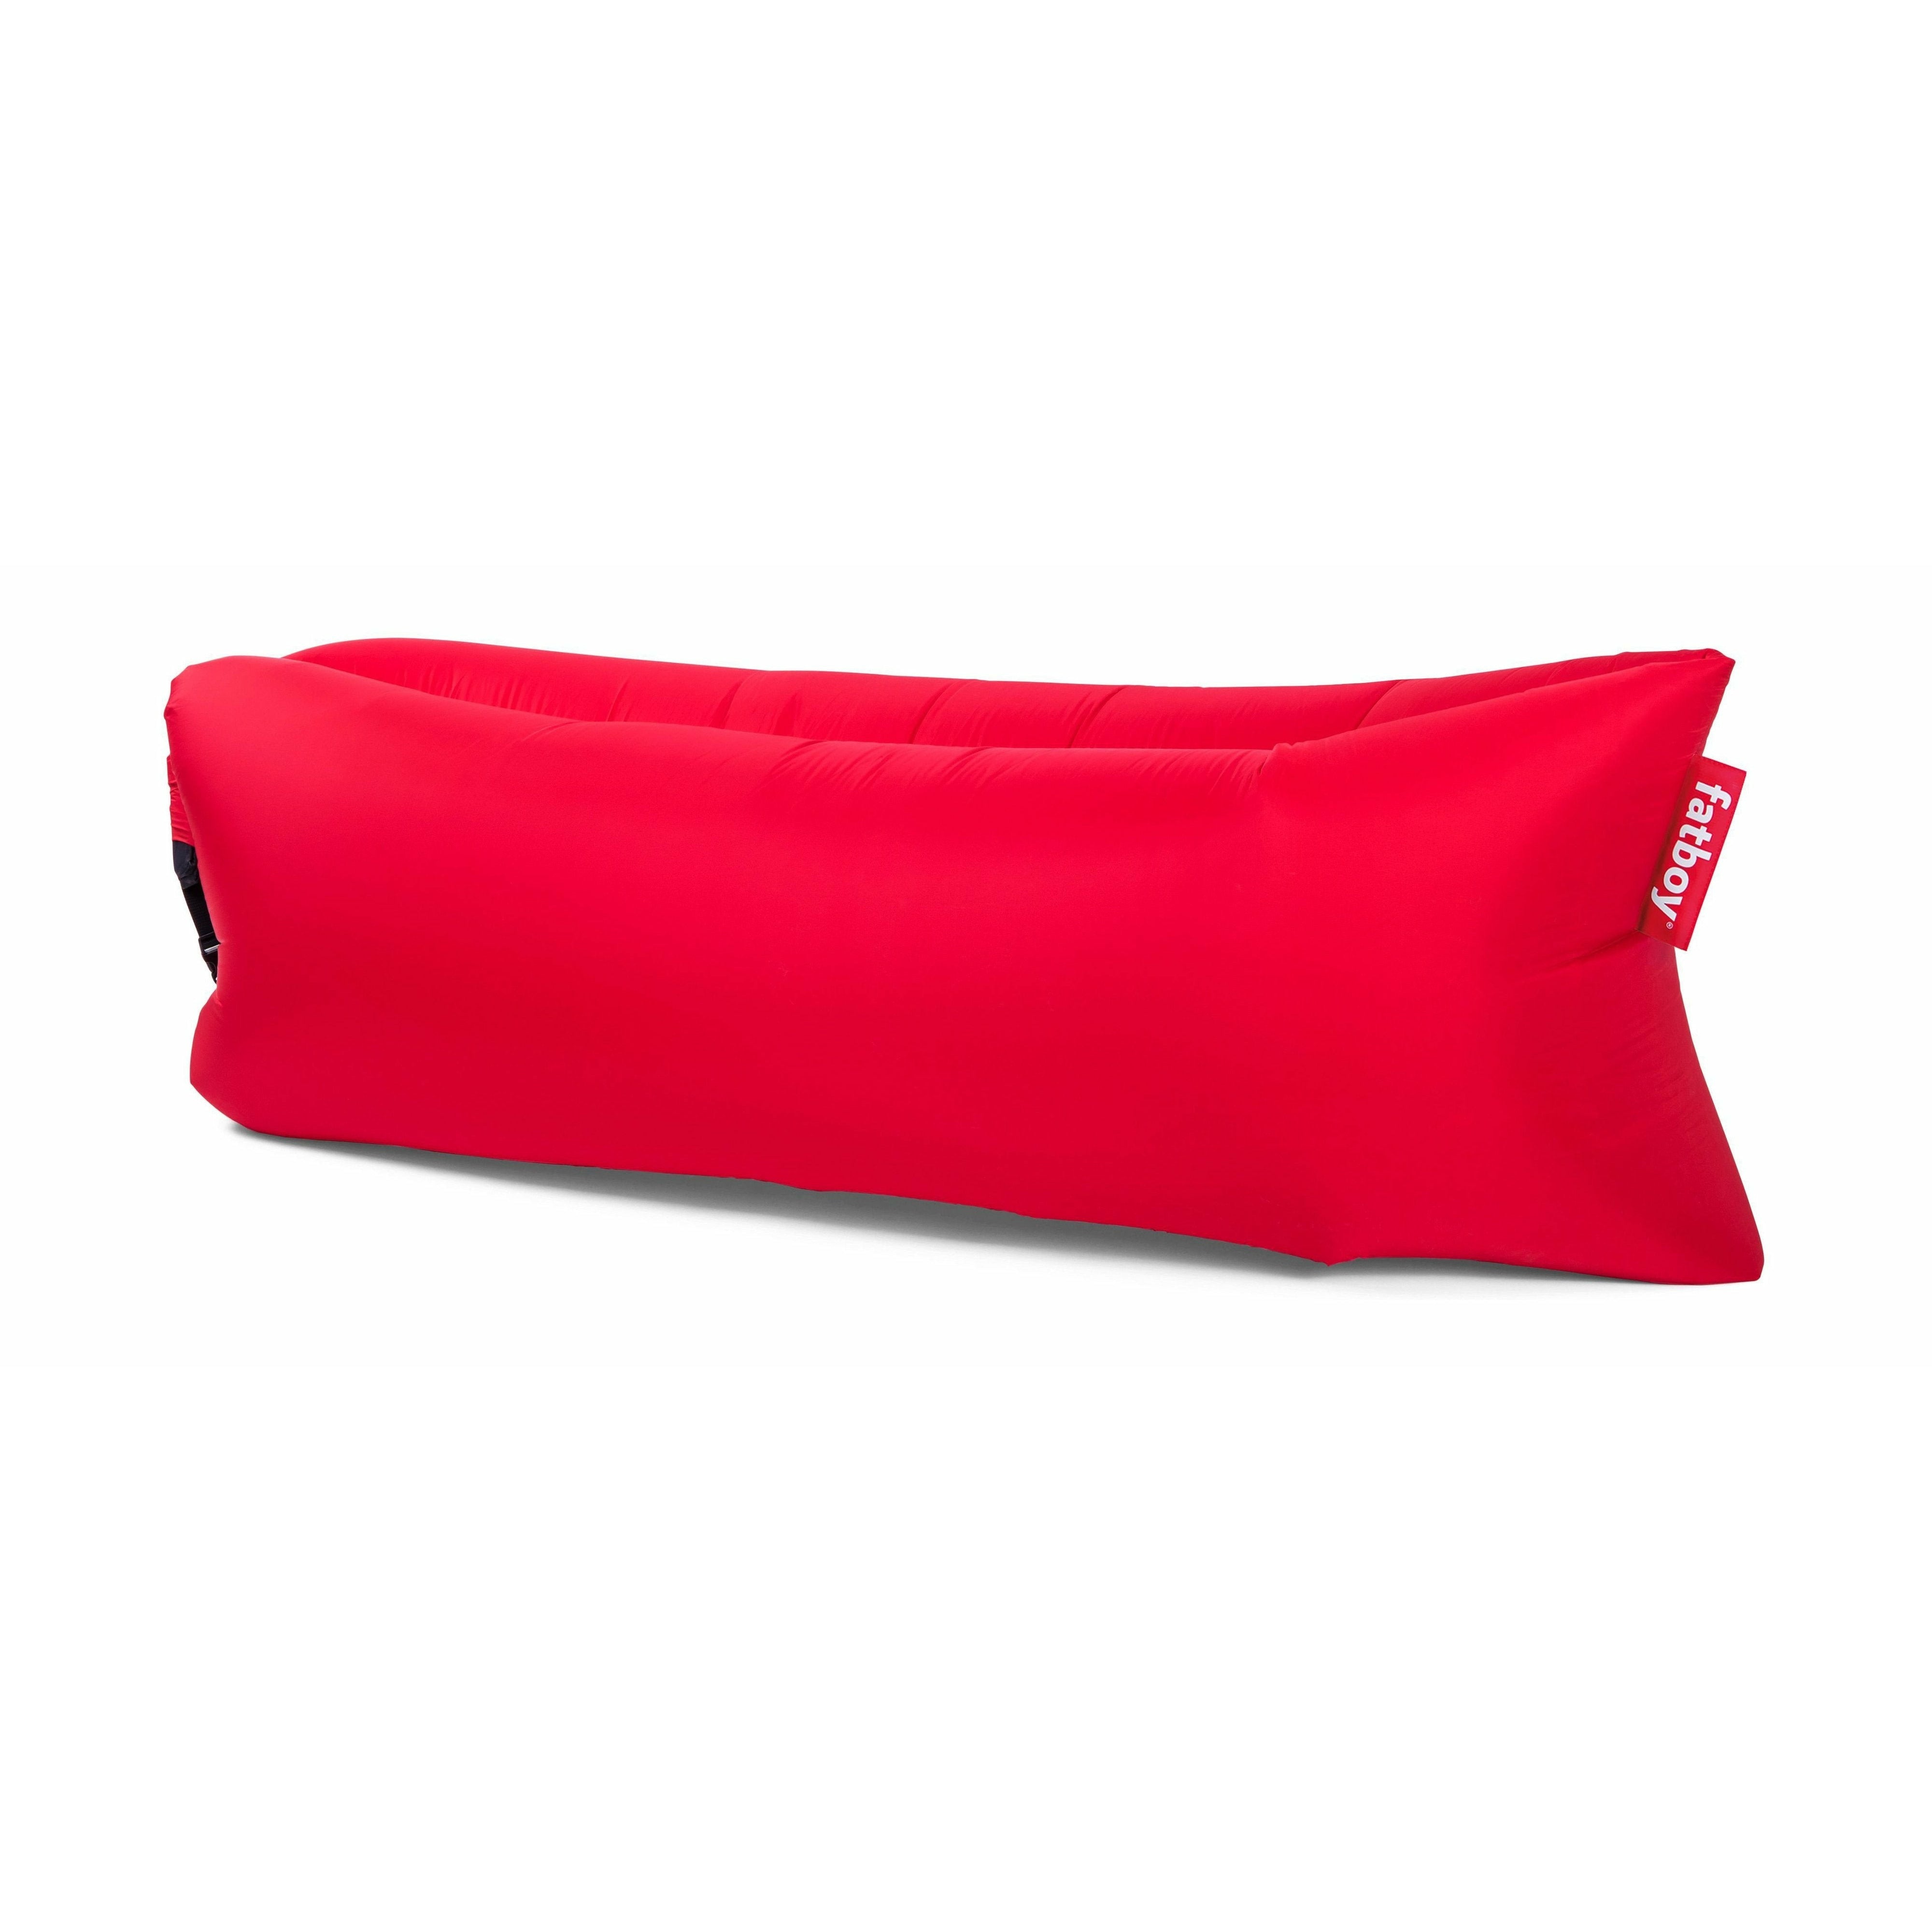 Fatboy Lamzac Sofa Air gonflable 3.0, rouge